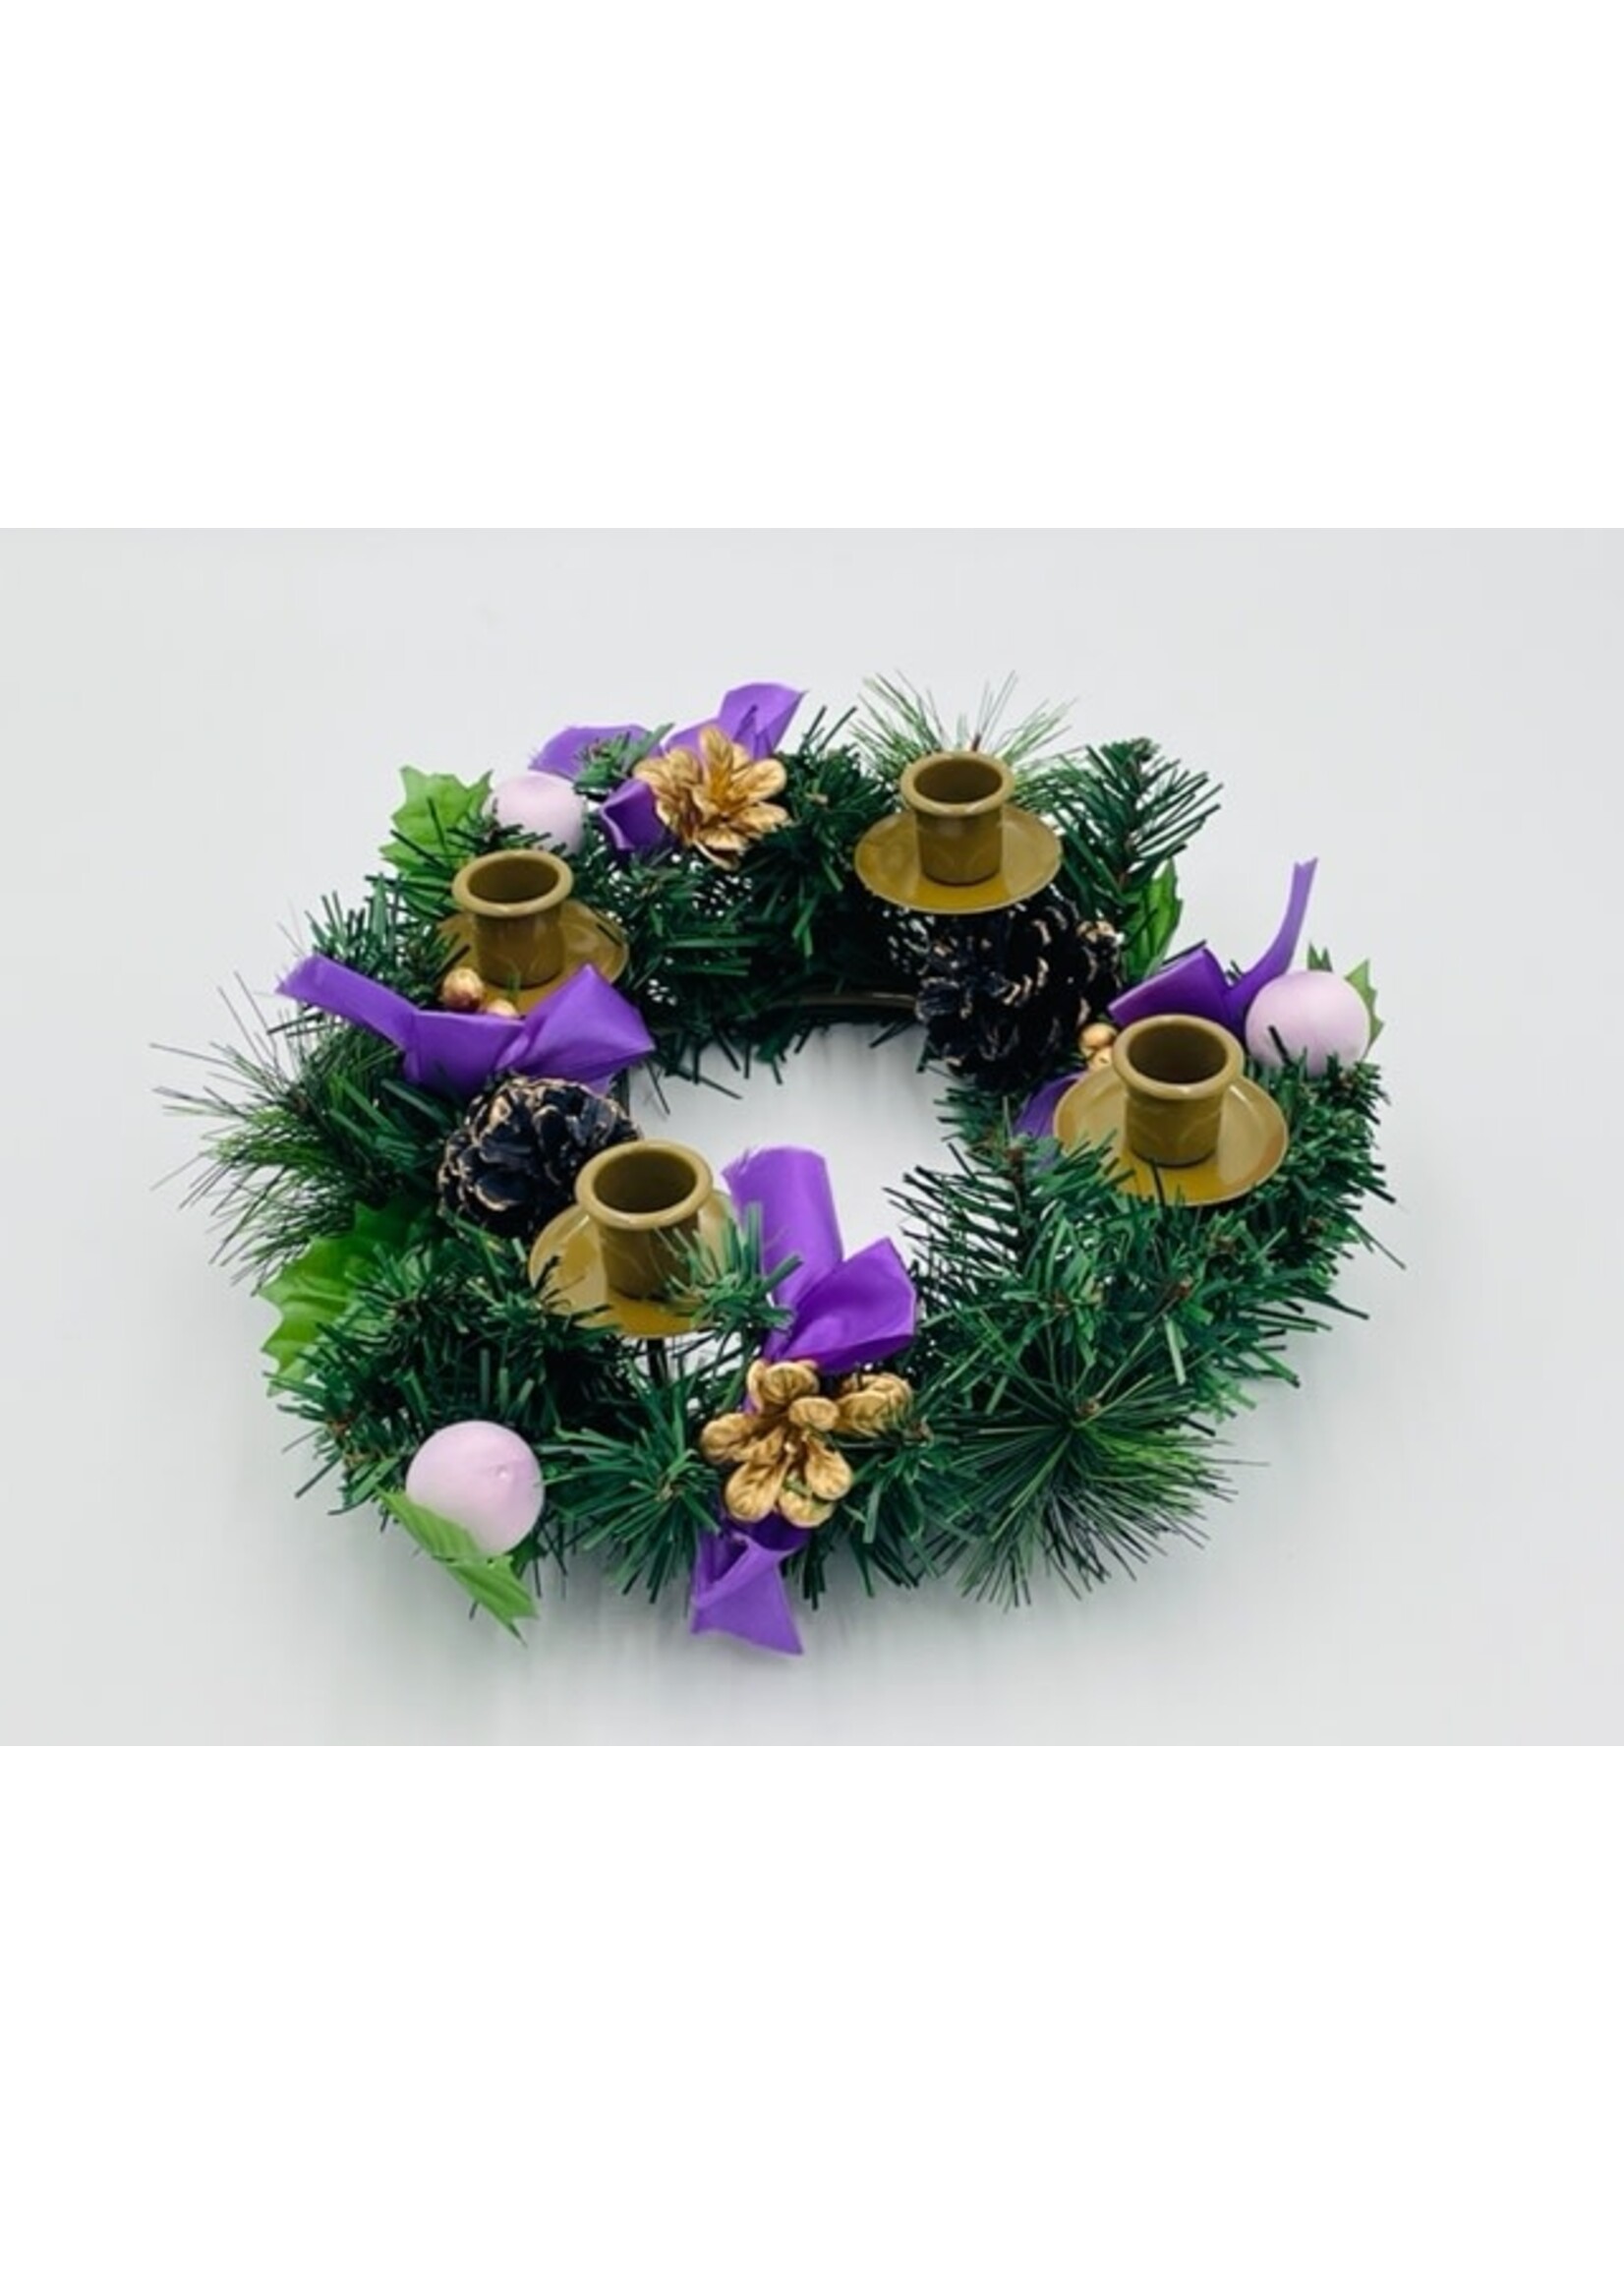 Advent Wreath with Purple Ribbons